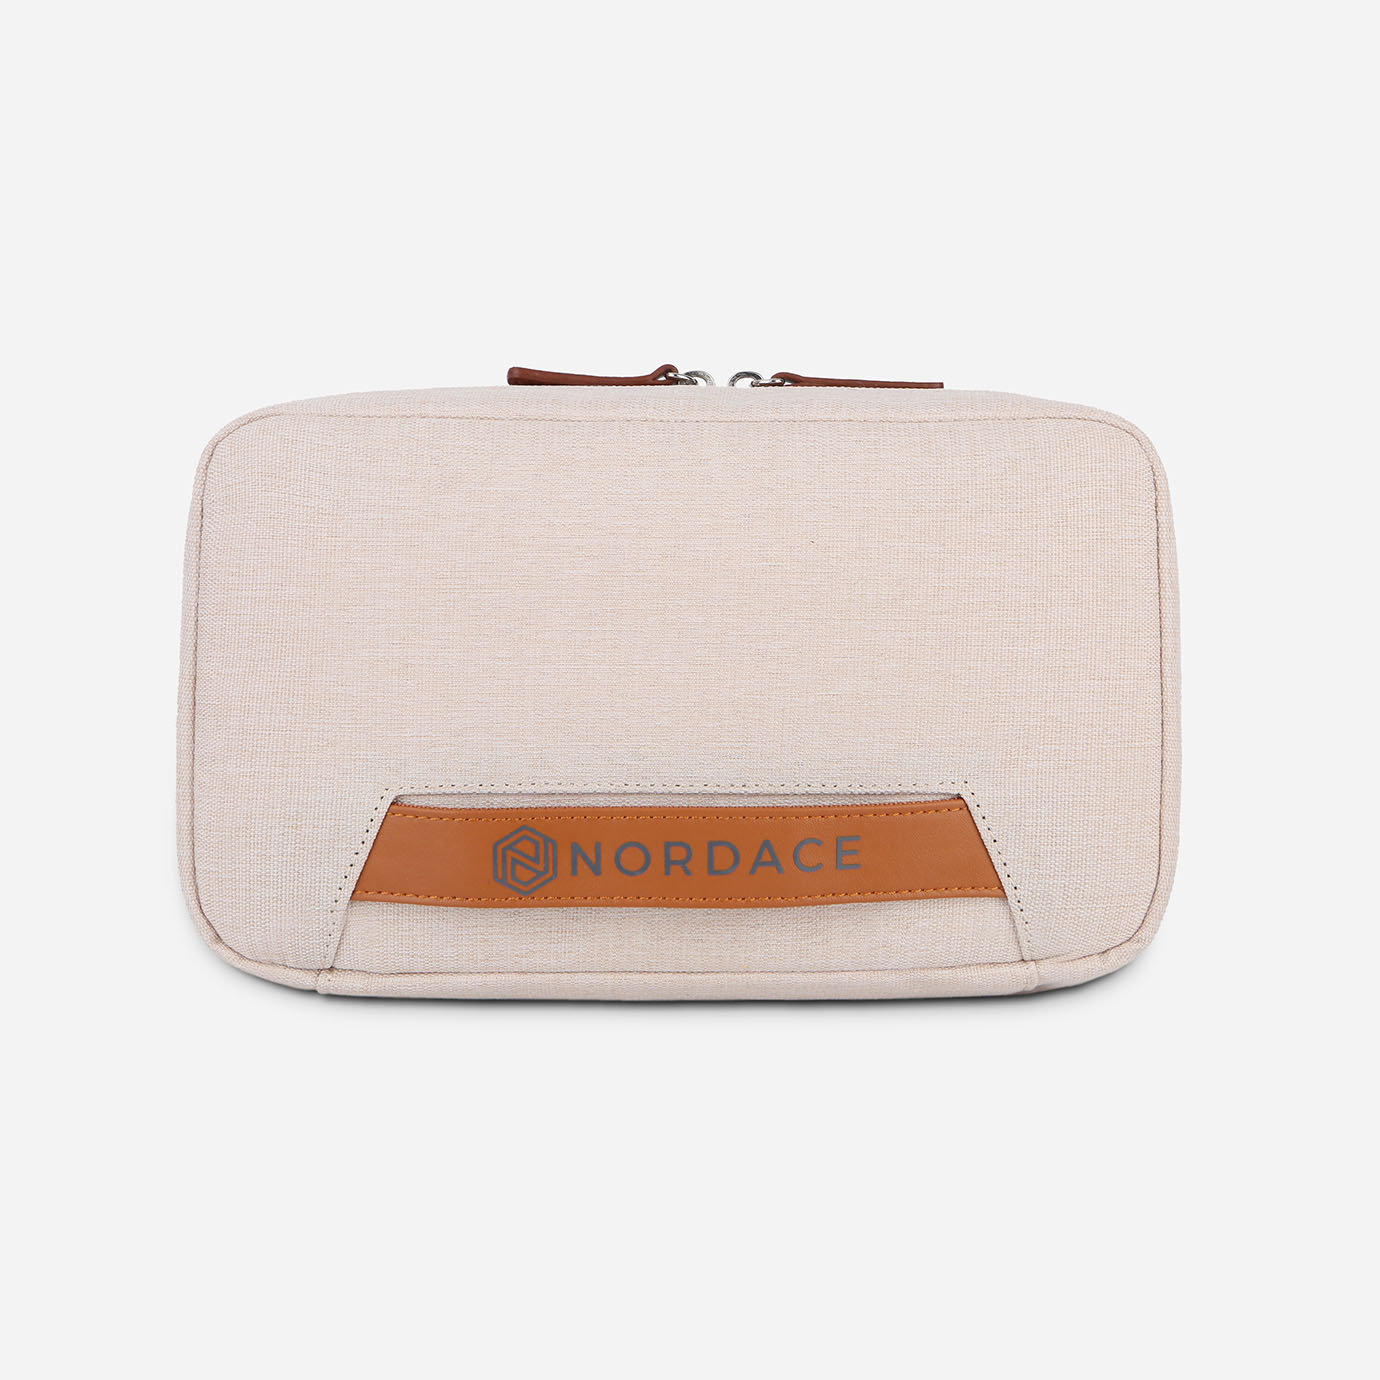 Nordace Siena Wash Pouch - 旅行收納包